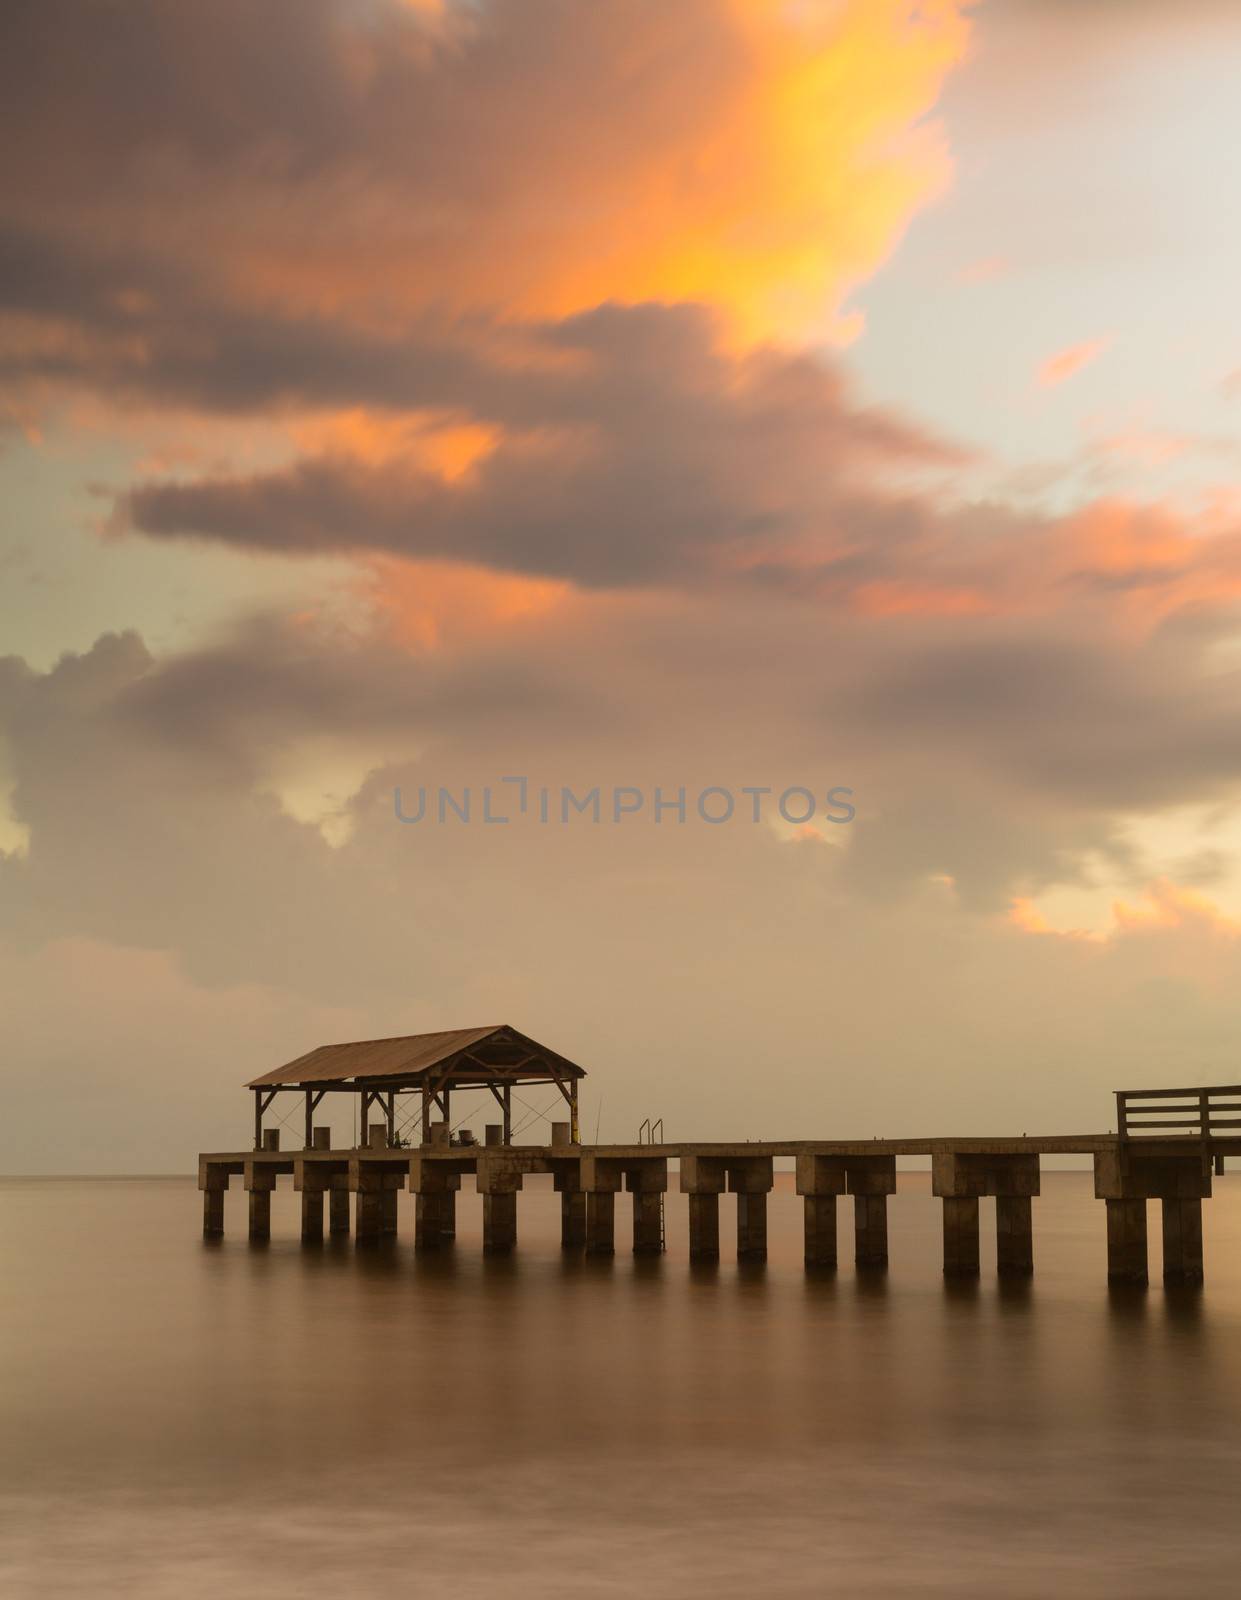 Long exposure image of Waimea pier at sunset blurs the ocean and bathes the structure in the warm glow of the setting sun. Taken on island of Kauai in Hawaiian islands